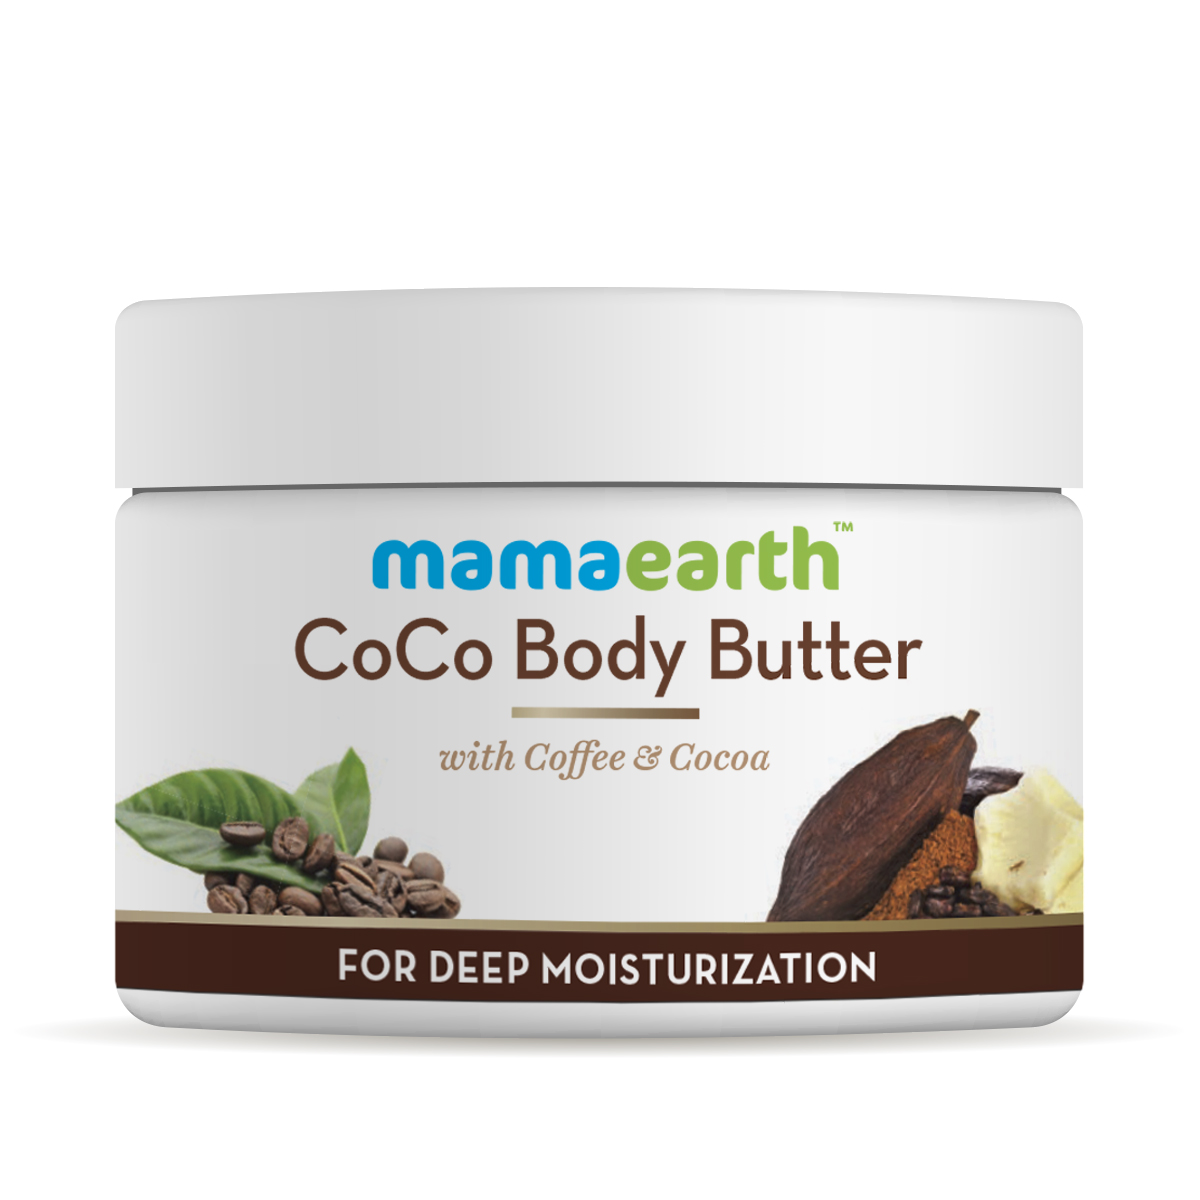 CoCo Body Butter for Dry Skin, with Coffee & Cocoa for Deep Moisturization- 200g